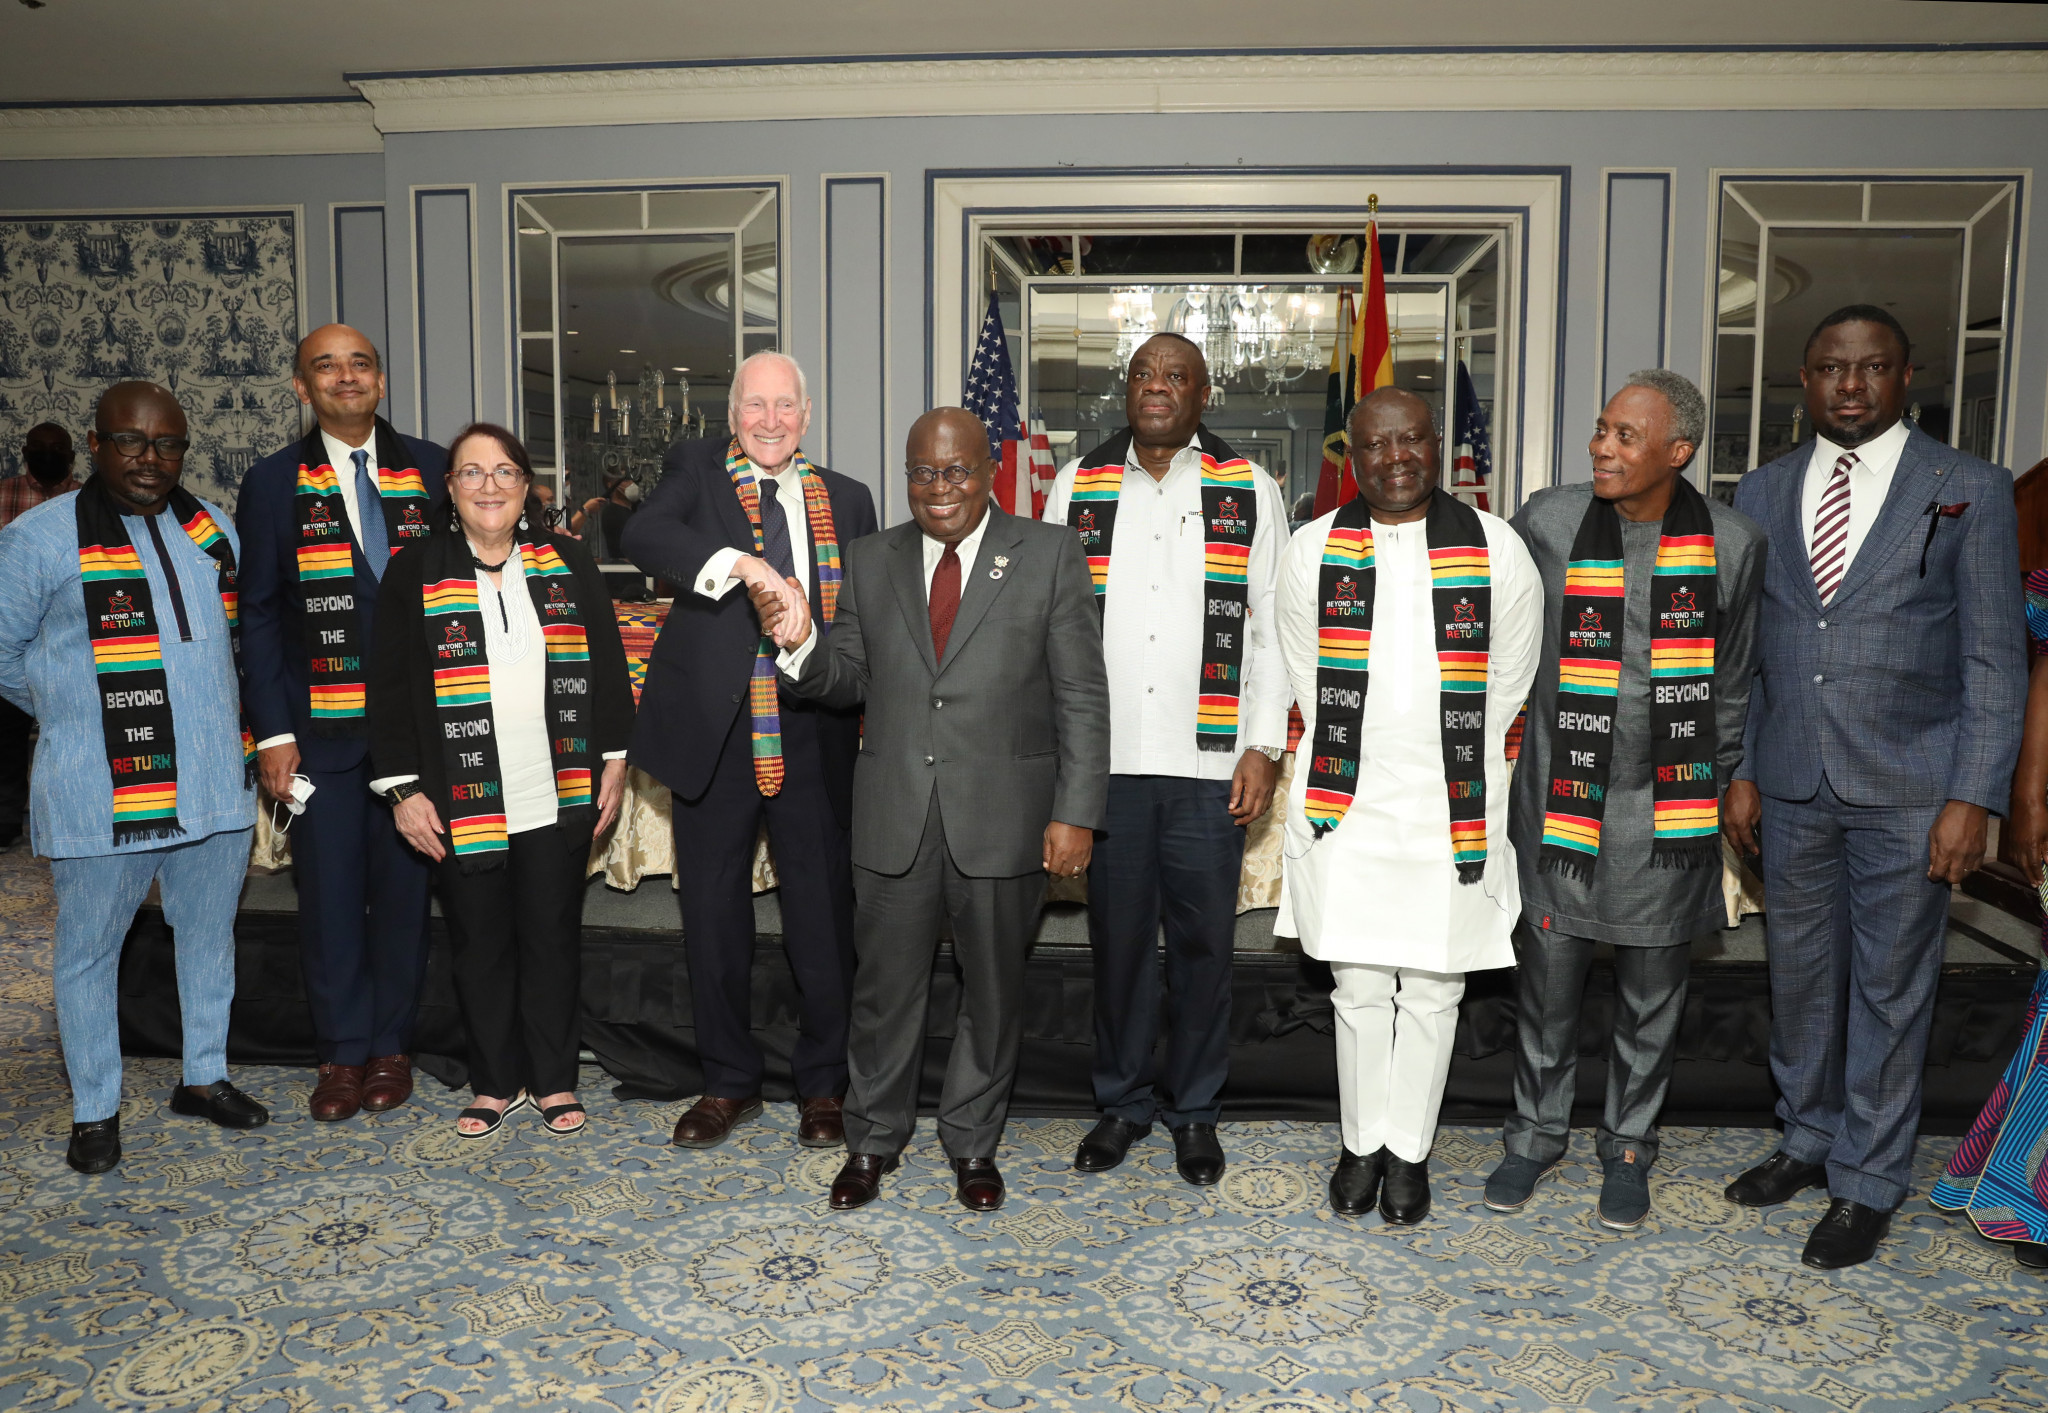 Draft MoU expected from Ghana’s creditors for $5.4B loan